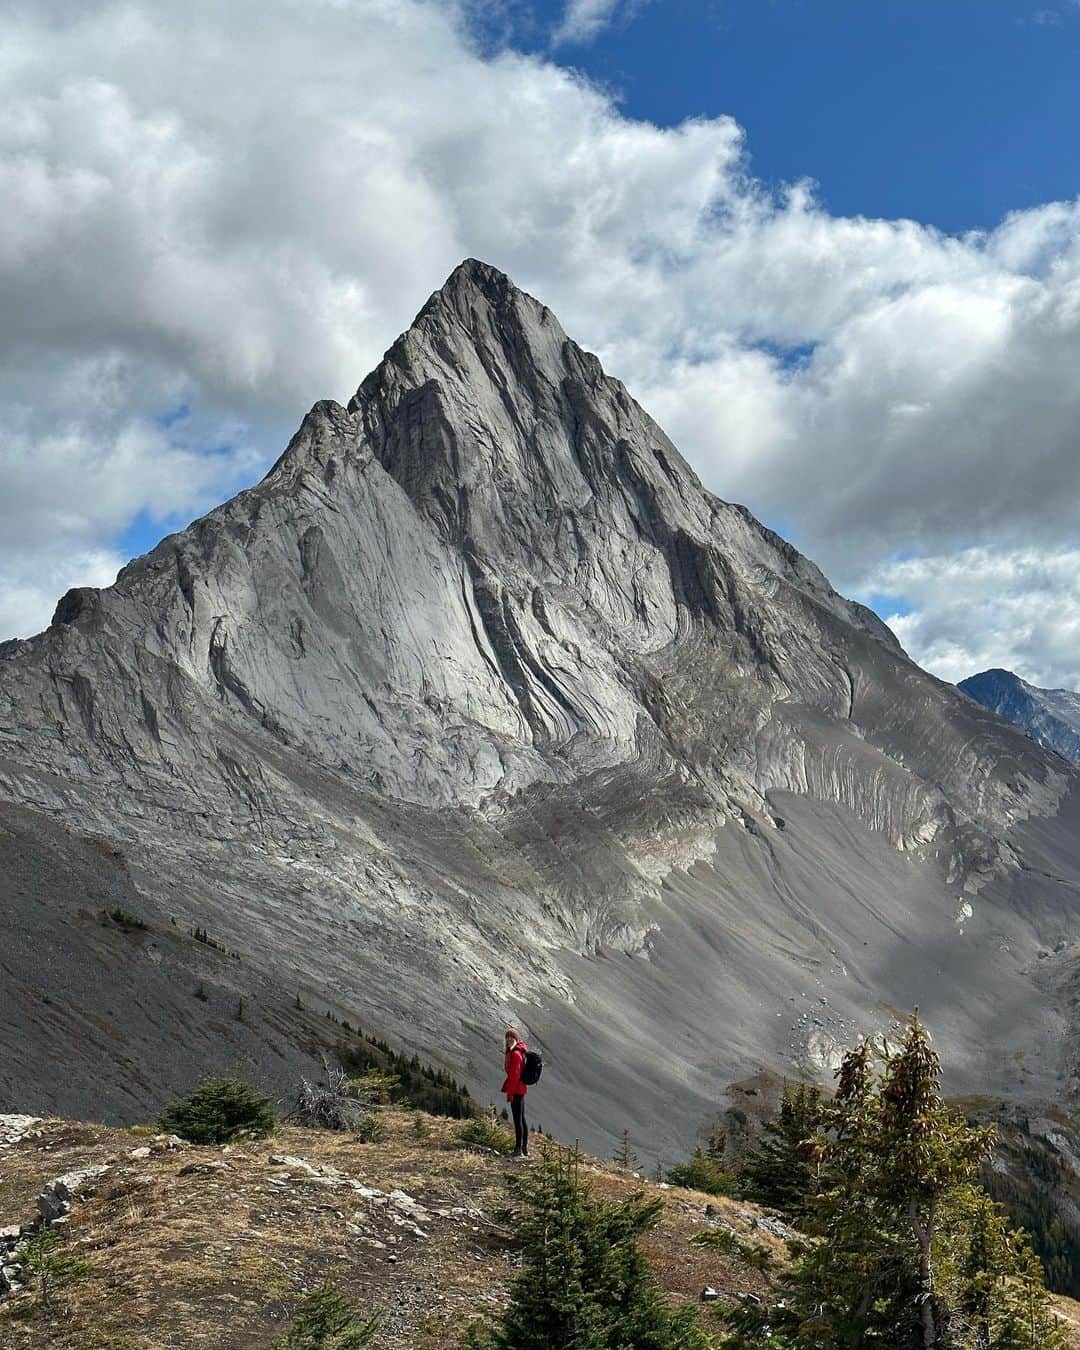 Zanna Van Dijkさんのインスタグラム写真 - (Zanna Van DijkInstagram)「📍Smutwood Peak, Kananaskis 🇨🇦  Tag someone you want to conquer this route with! 🥾   Guys, this was one of the best hikes of my LIFE 😭 It’s the route which inspired our whole trip to the Kananaskis region of the Rockies and it surpassed all our expectations!! The views and landscapes were truly breathtaking. Add it to your hiking bucket list ASAP! ☑️   Here’s the deets: ➡️ Distance: 19km ➡️ Elevation gain: 1000m  ➡️ Difficulty: Hard. The climb is long, steep & relentless. As you near the summit the path narrows then disappears and you have to scramble over scree covered rocks. If you’re not feeling it, you can stop before the scramble and you still get amazing views 👌🏼  ➡️ Location: The trailhead is a short walk from @mountengadine lodge where we stayed. Otherwise you can drive in from Canmore in 45mins-1hr. The drive is STUNNING, but the road to the trailhead is unpaved so ensure you have a suitable car.  See more of the route on my stories! I’m happy to answer any other questions you have! I’ll be listing all our favourite hikes in a travel guide 🇨🇦♥️ #mountsmutwood #smutwood #smutwoodpeak #kananaskis #kananaskiscountry #kananaskisalberta」9月15日 0時03分 - zannavandijk